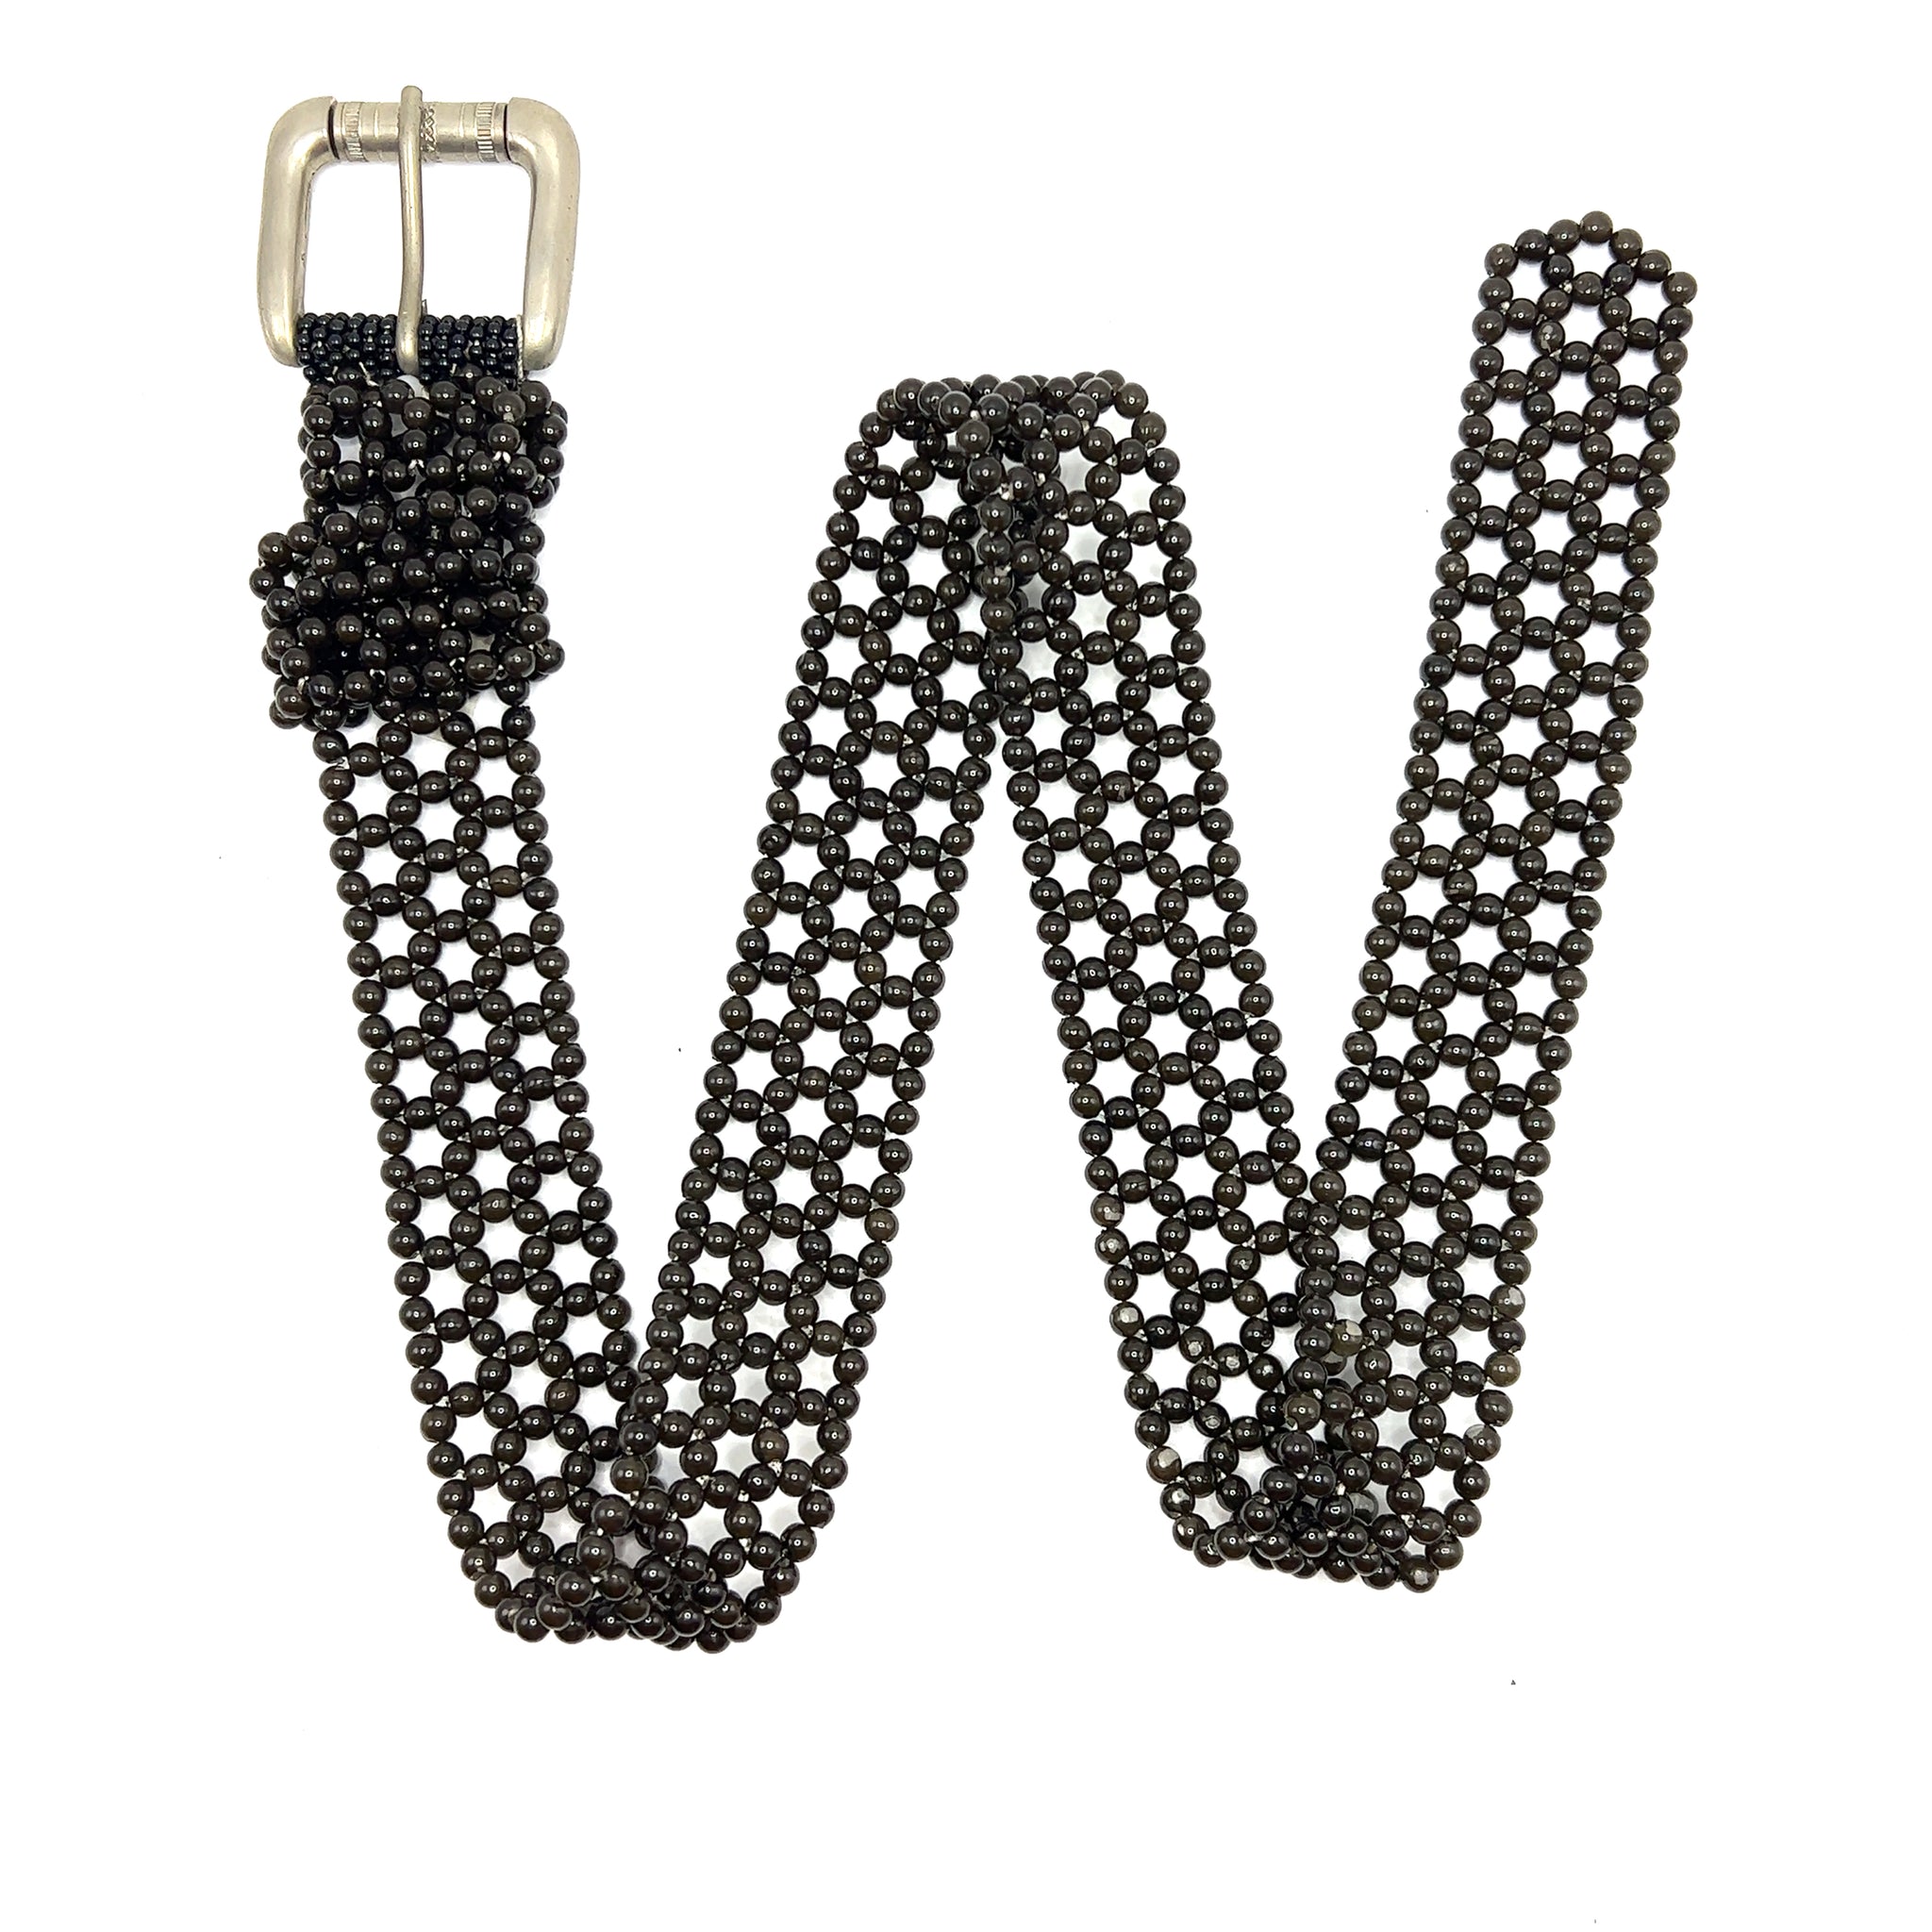 Handcrafted Beaded Black Pearl Buckled Belt Unique Giftware